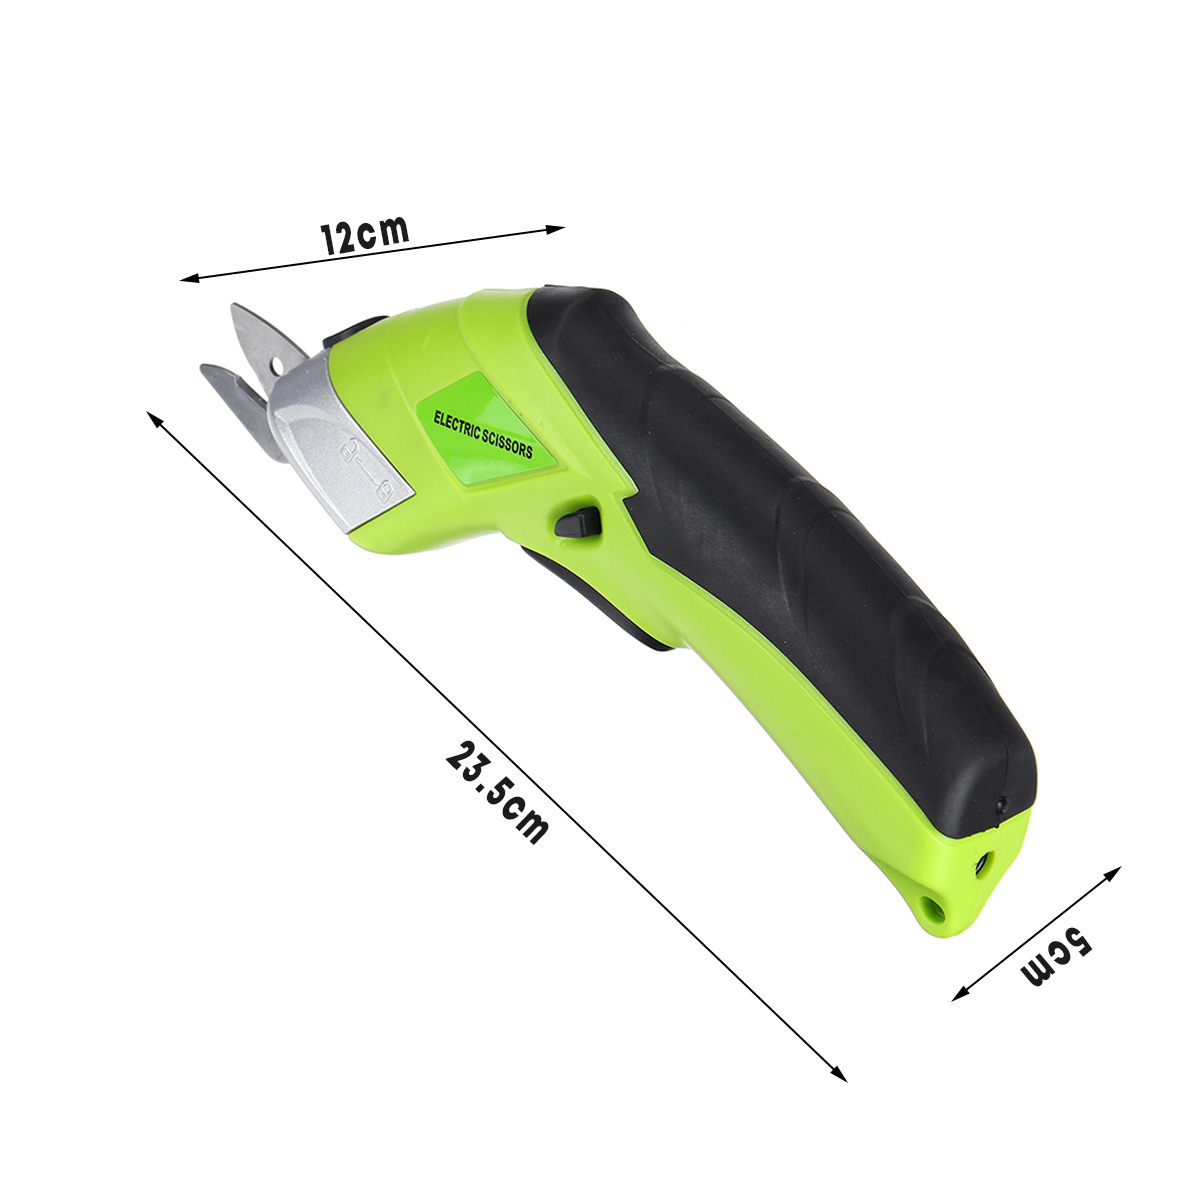 220V-Electric-Automatic-Scissors-Cordless-Shears-Fabric-Paper-Cutter-2-Blades--Case-1553446-7